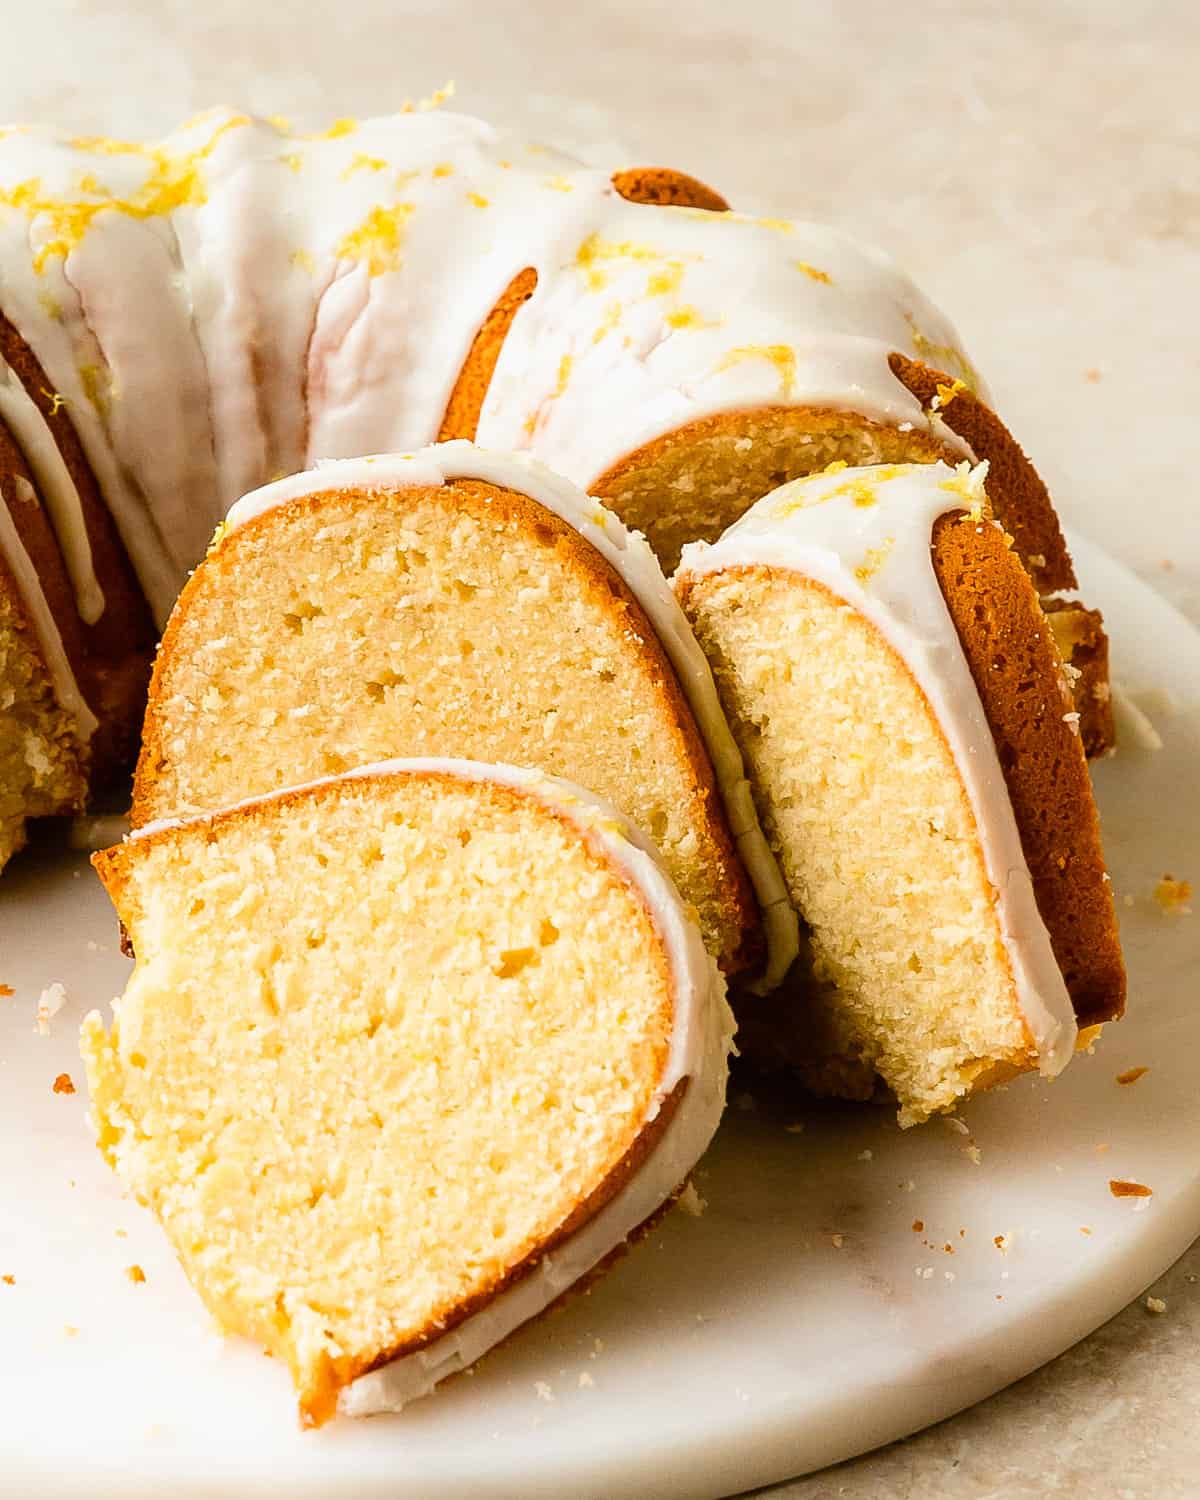 Lemon cream cheese pound cake is a decadent, dense and buttery lemon pound cake made with cream cheese. Top this lemon cake with a sweet and tart lemon glaze for even more lemon flavor. Enjoy this easy to make, old fashioned lemon pound cake for breakfast, brunch or dessert.